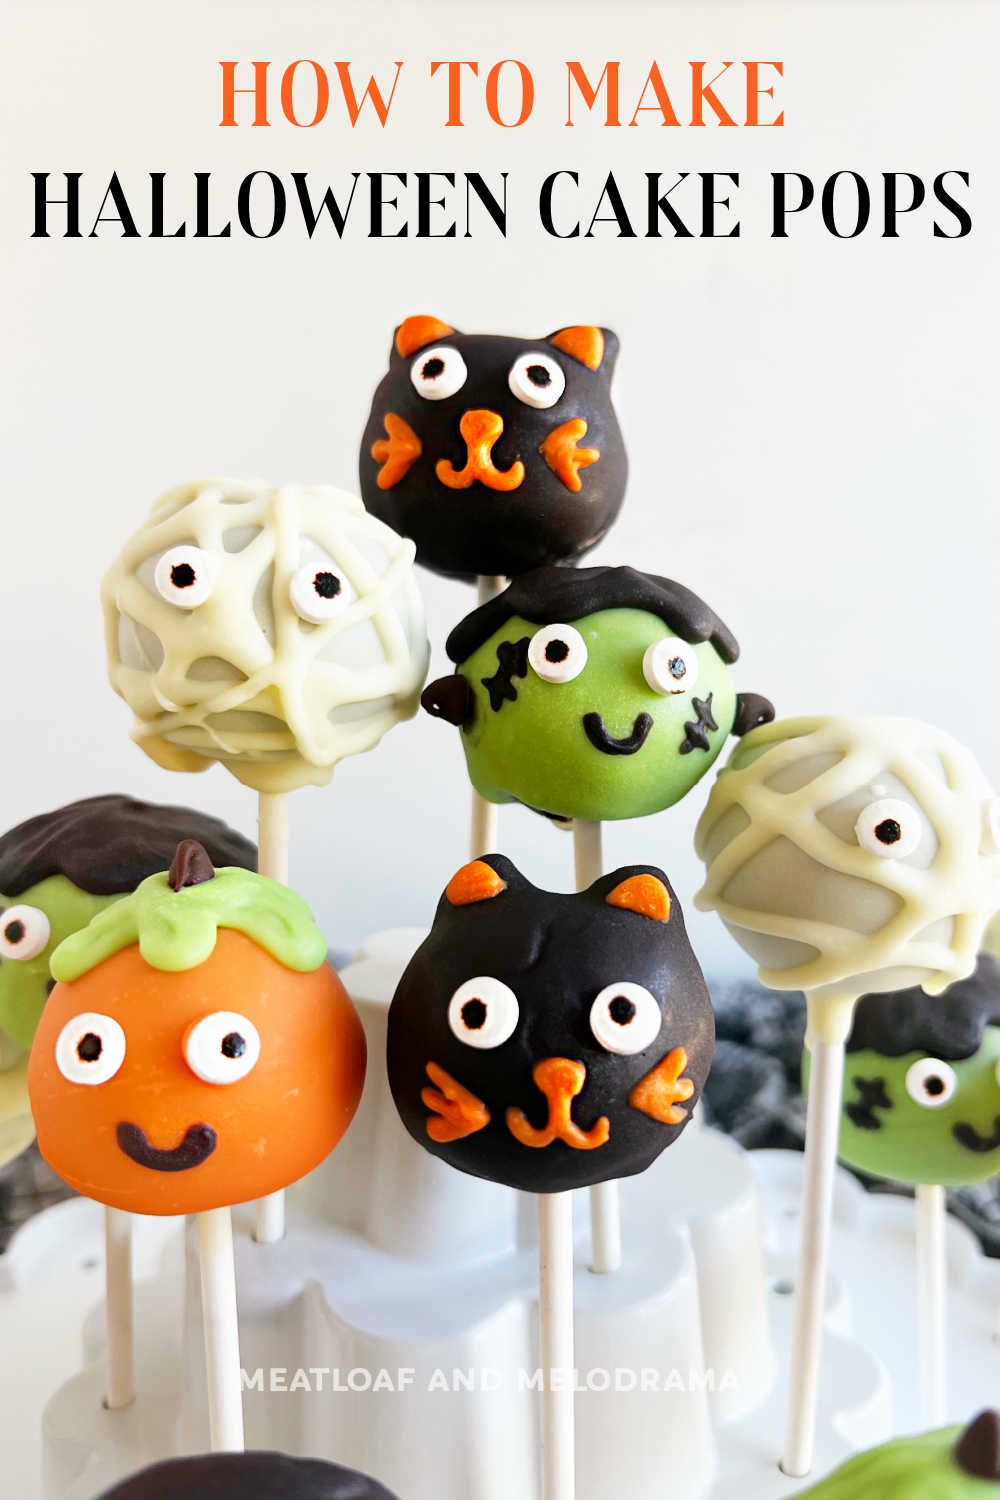 Halloween Cake Pops are a fun Halloween treat made with cake, frosting and candy melts and decorated for spooky season. Perfect for a Halloween Party! via @meamel